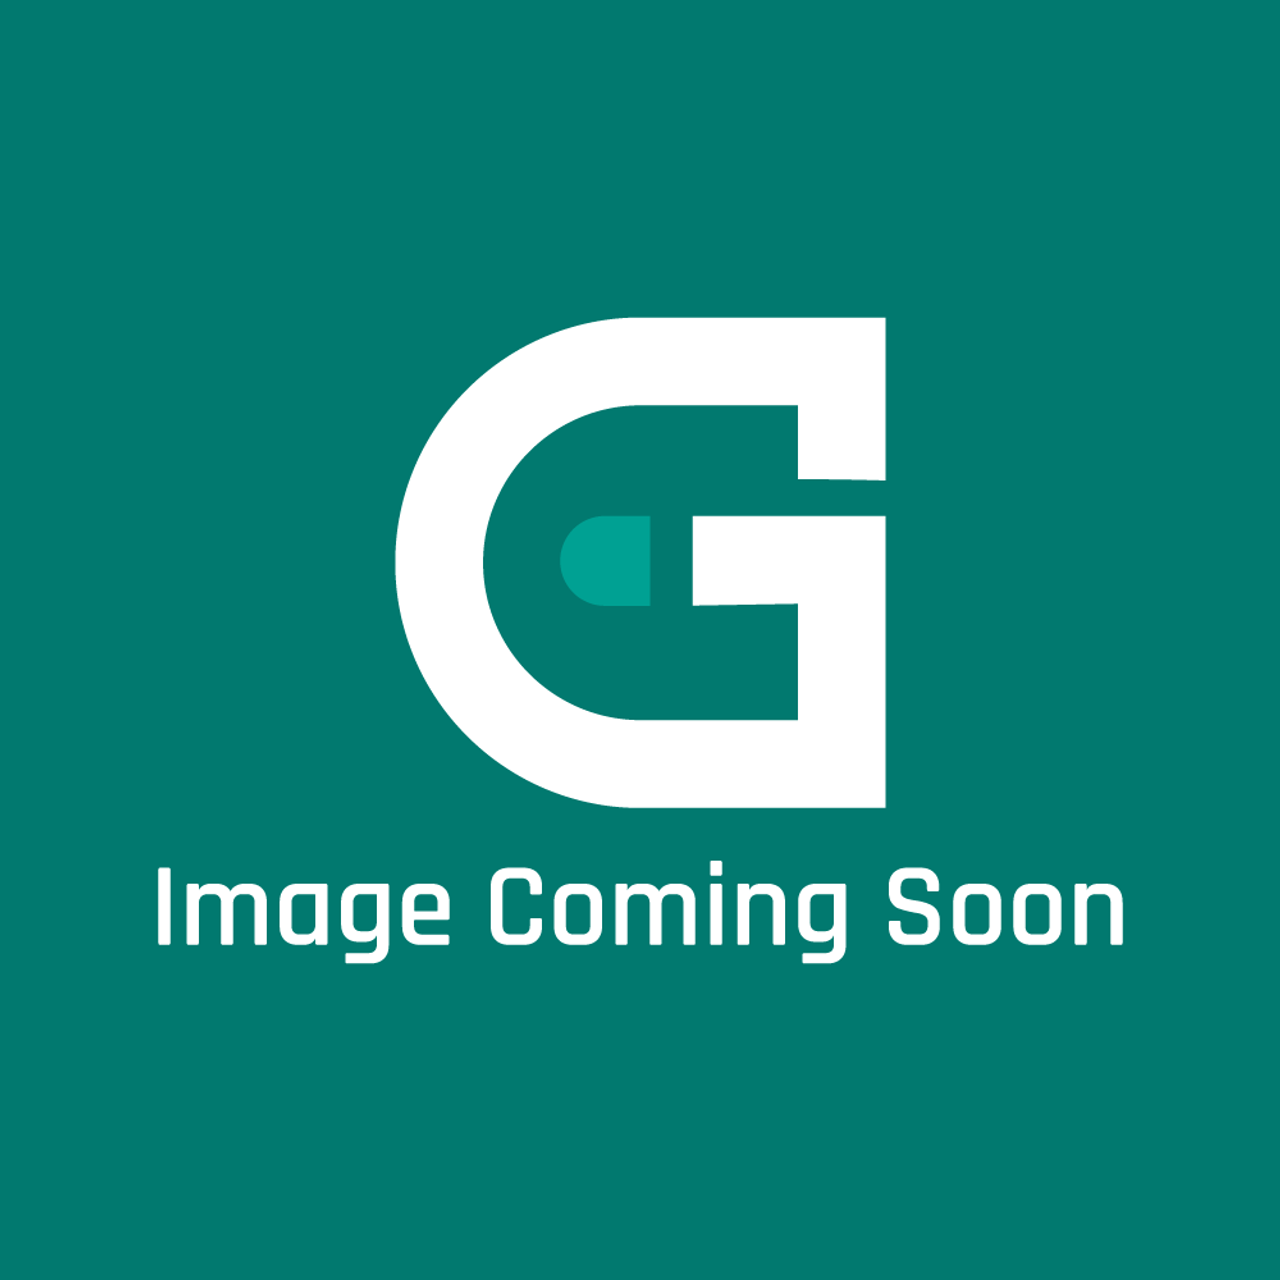 Frigidaire - Electrolux 5304512400 Pc Board - Image Coming Soon!